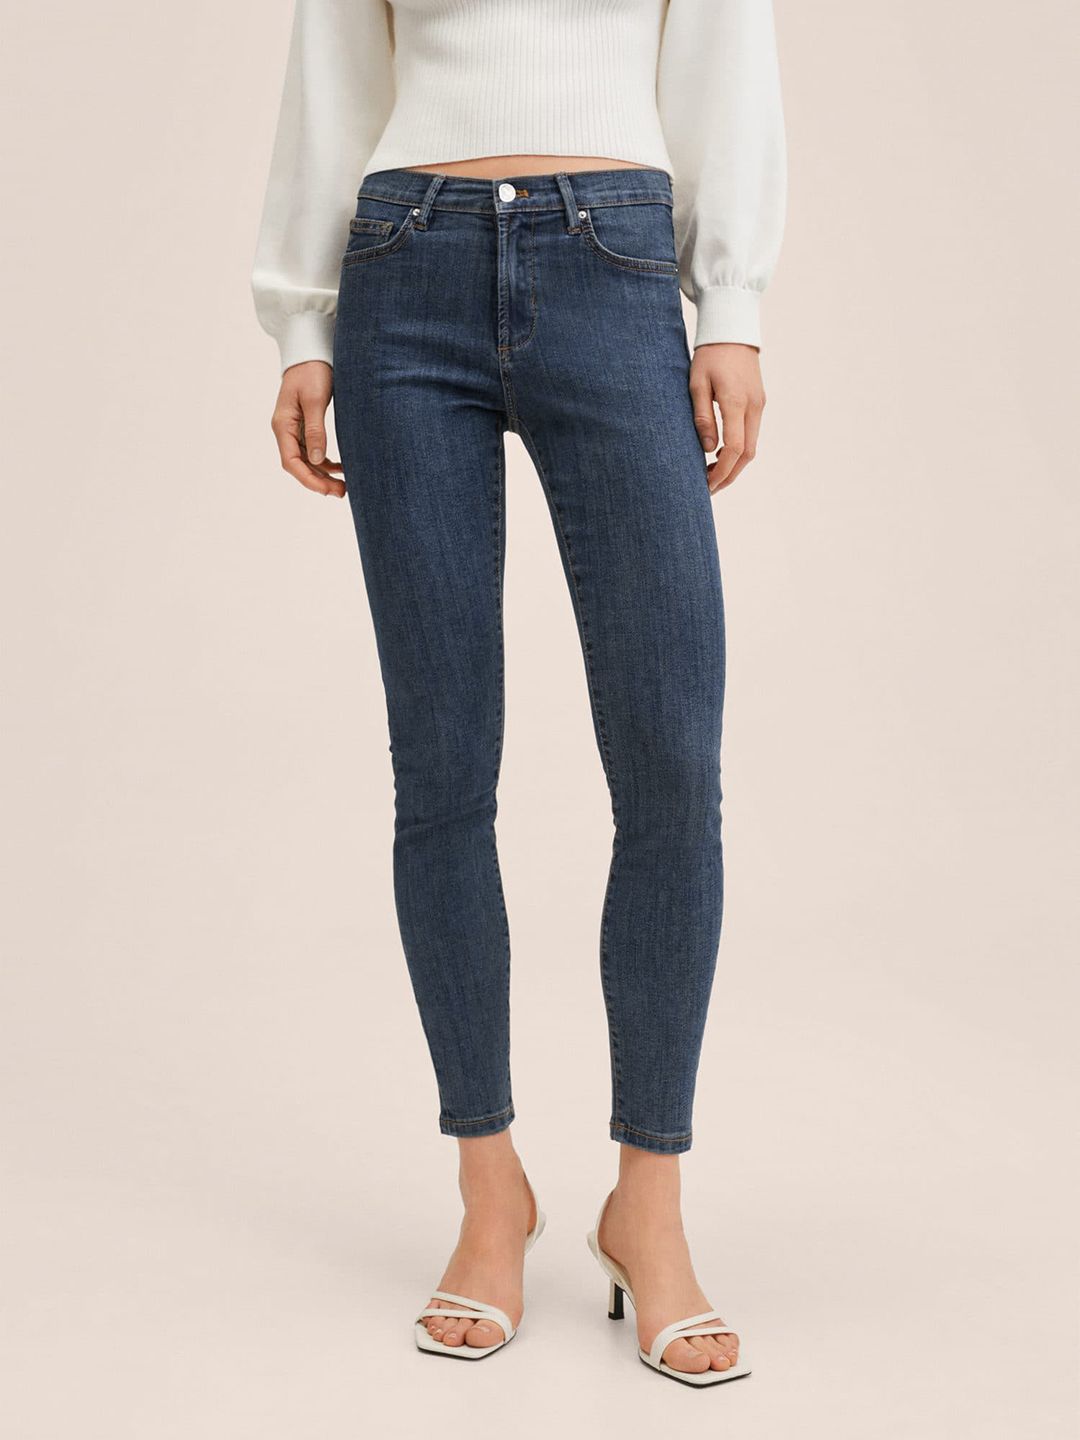 MANGO Women Blue Skinny Fit Stretchable Jeans Price in India